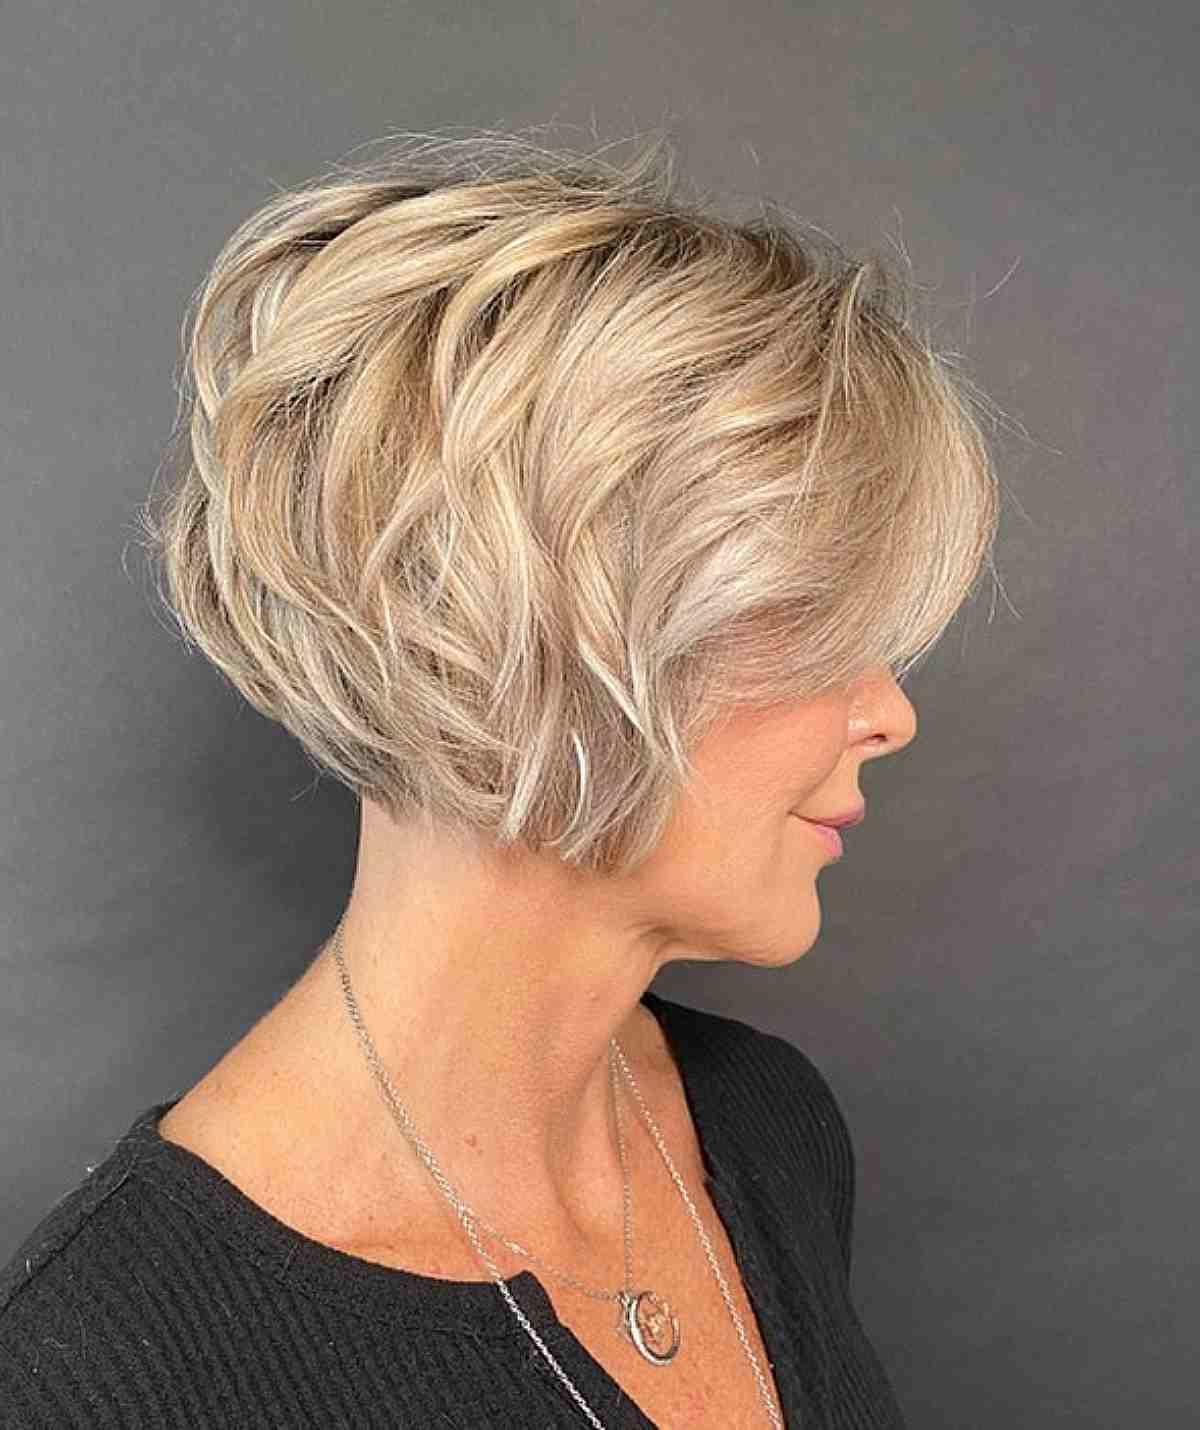 Jaw-Length Short A-Line Wavy Hair with Side Bangs